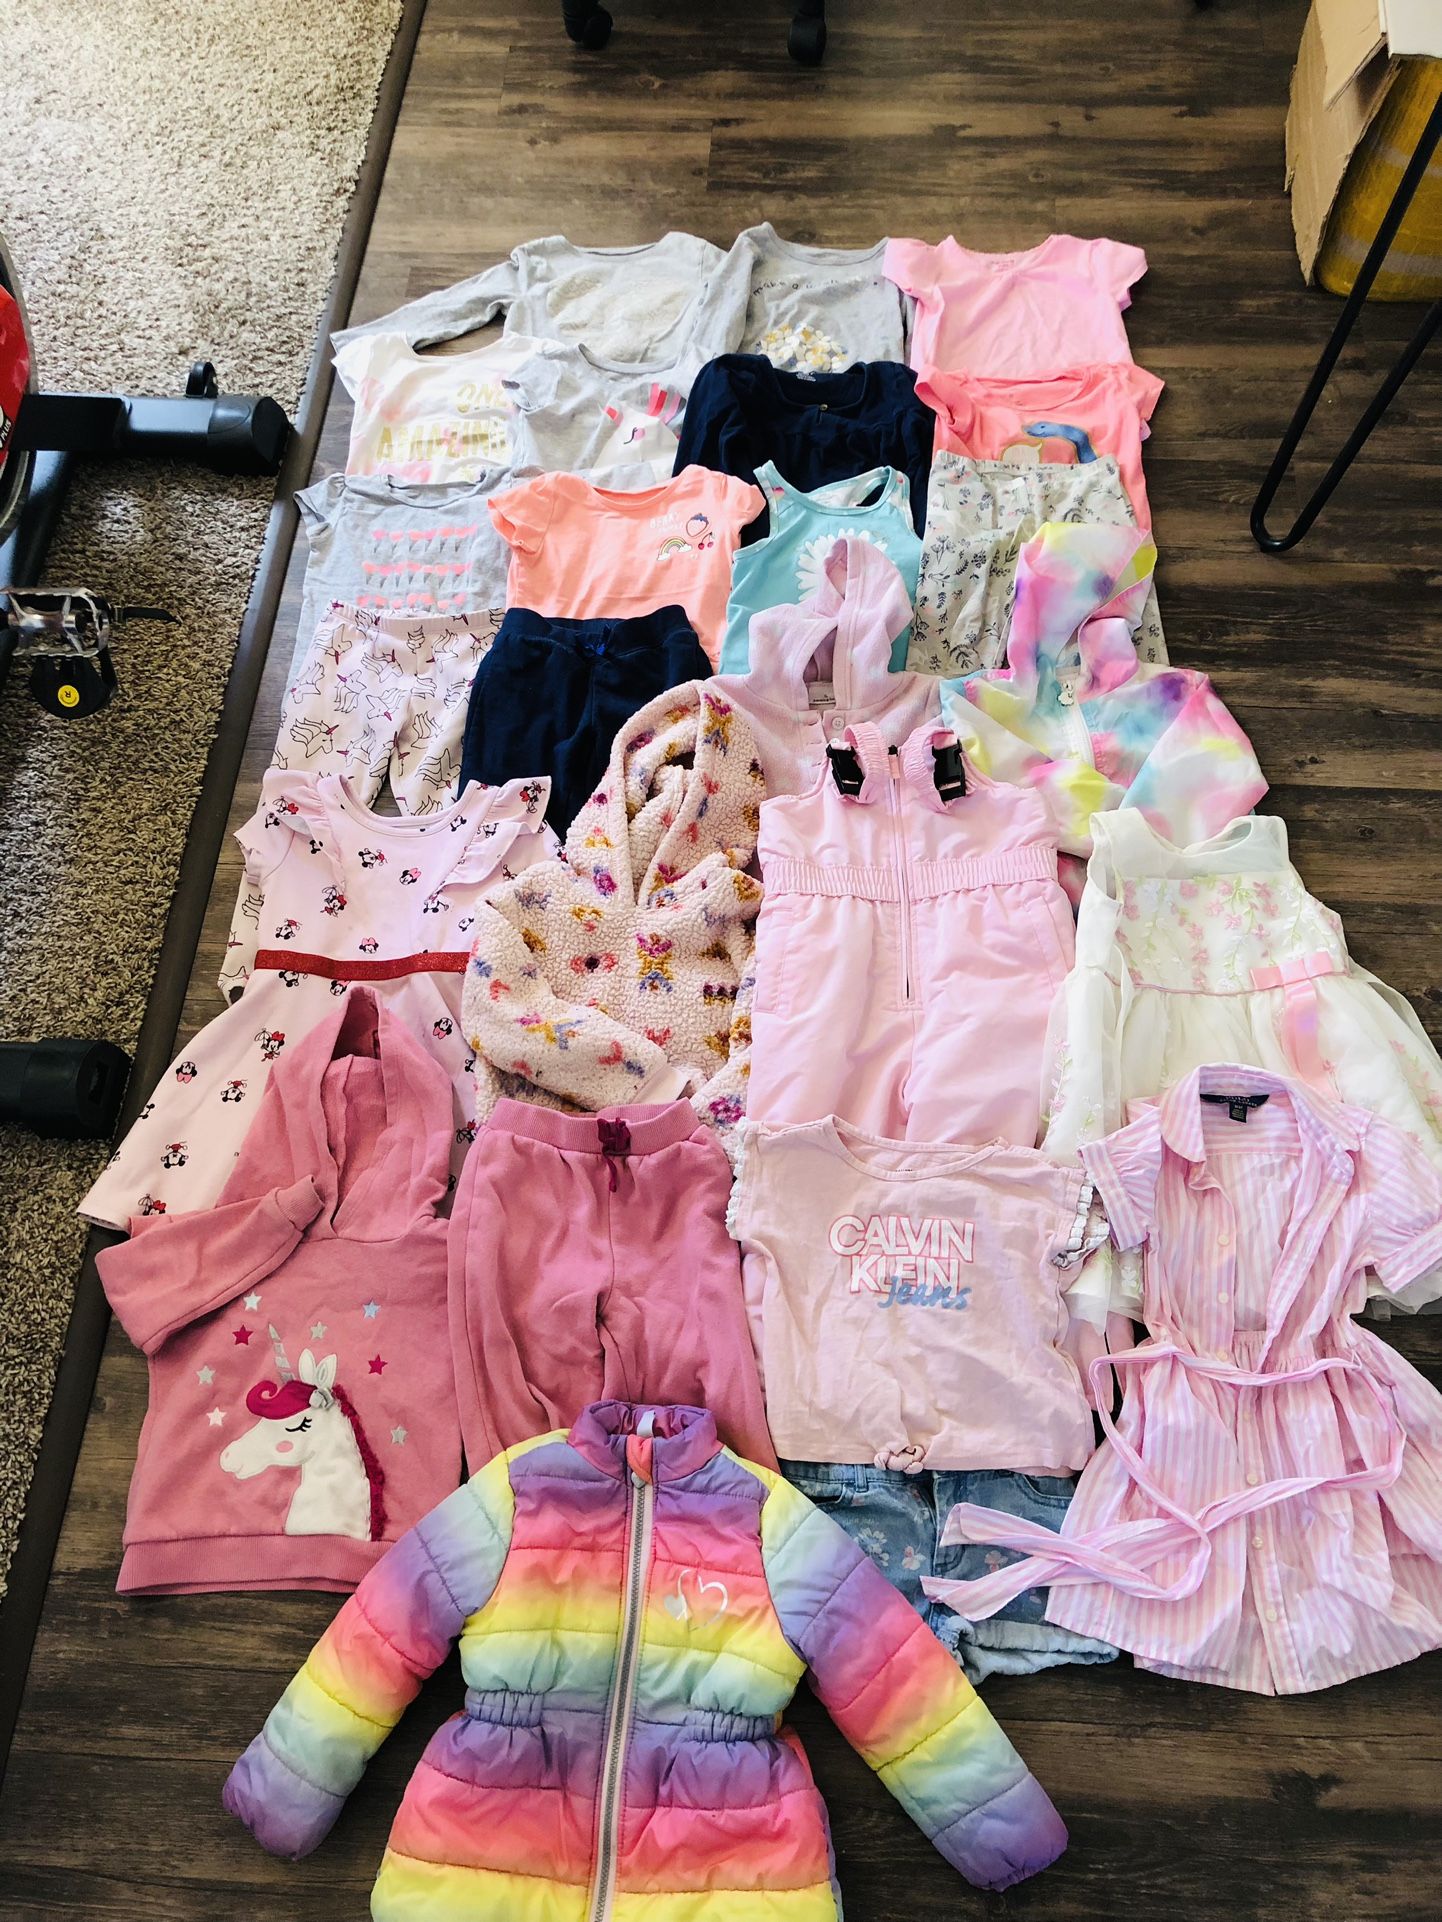 Mix Toddler Girls 3T-4T Clothes Lot,25 pcs.$2/ea,Must Take All